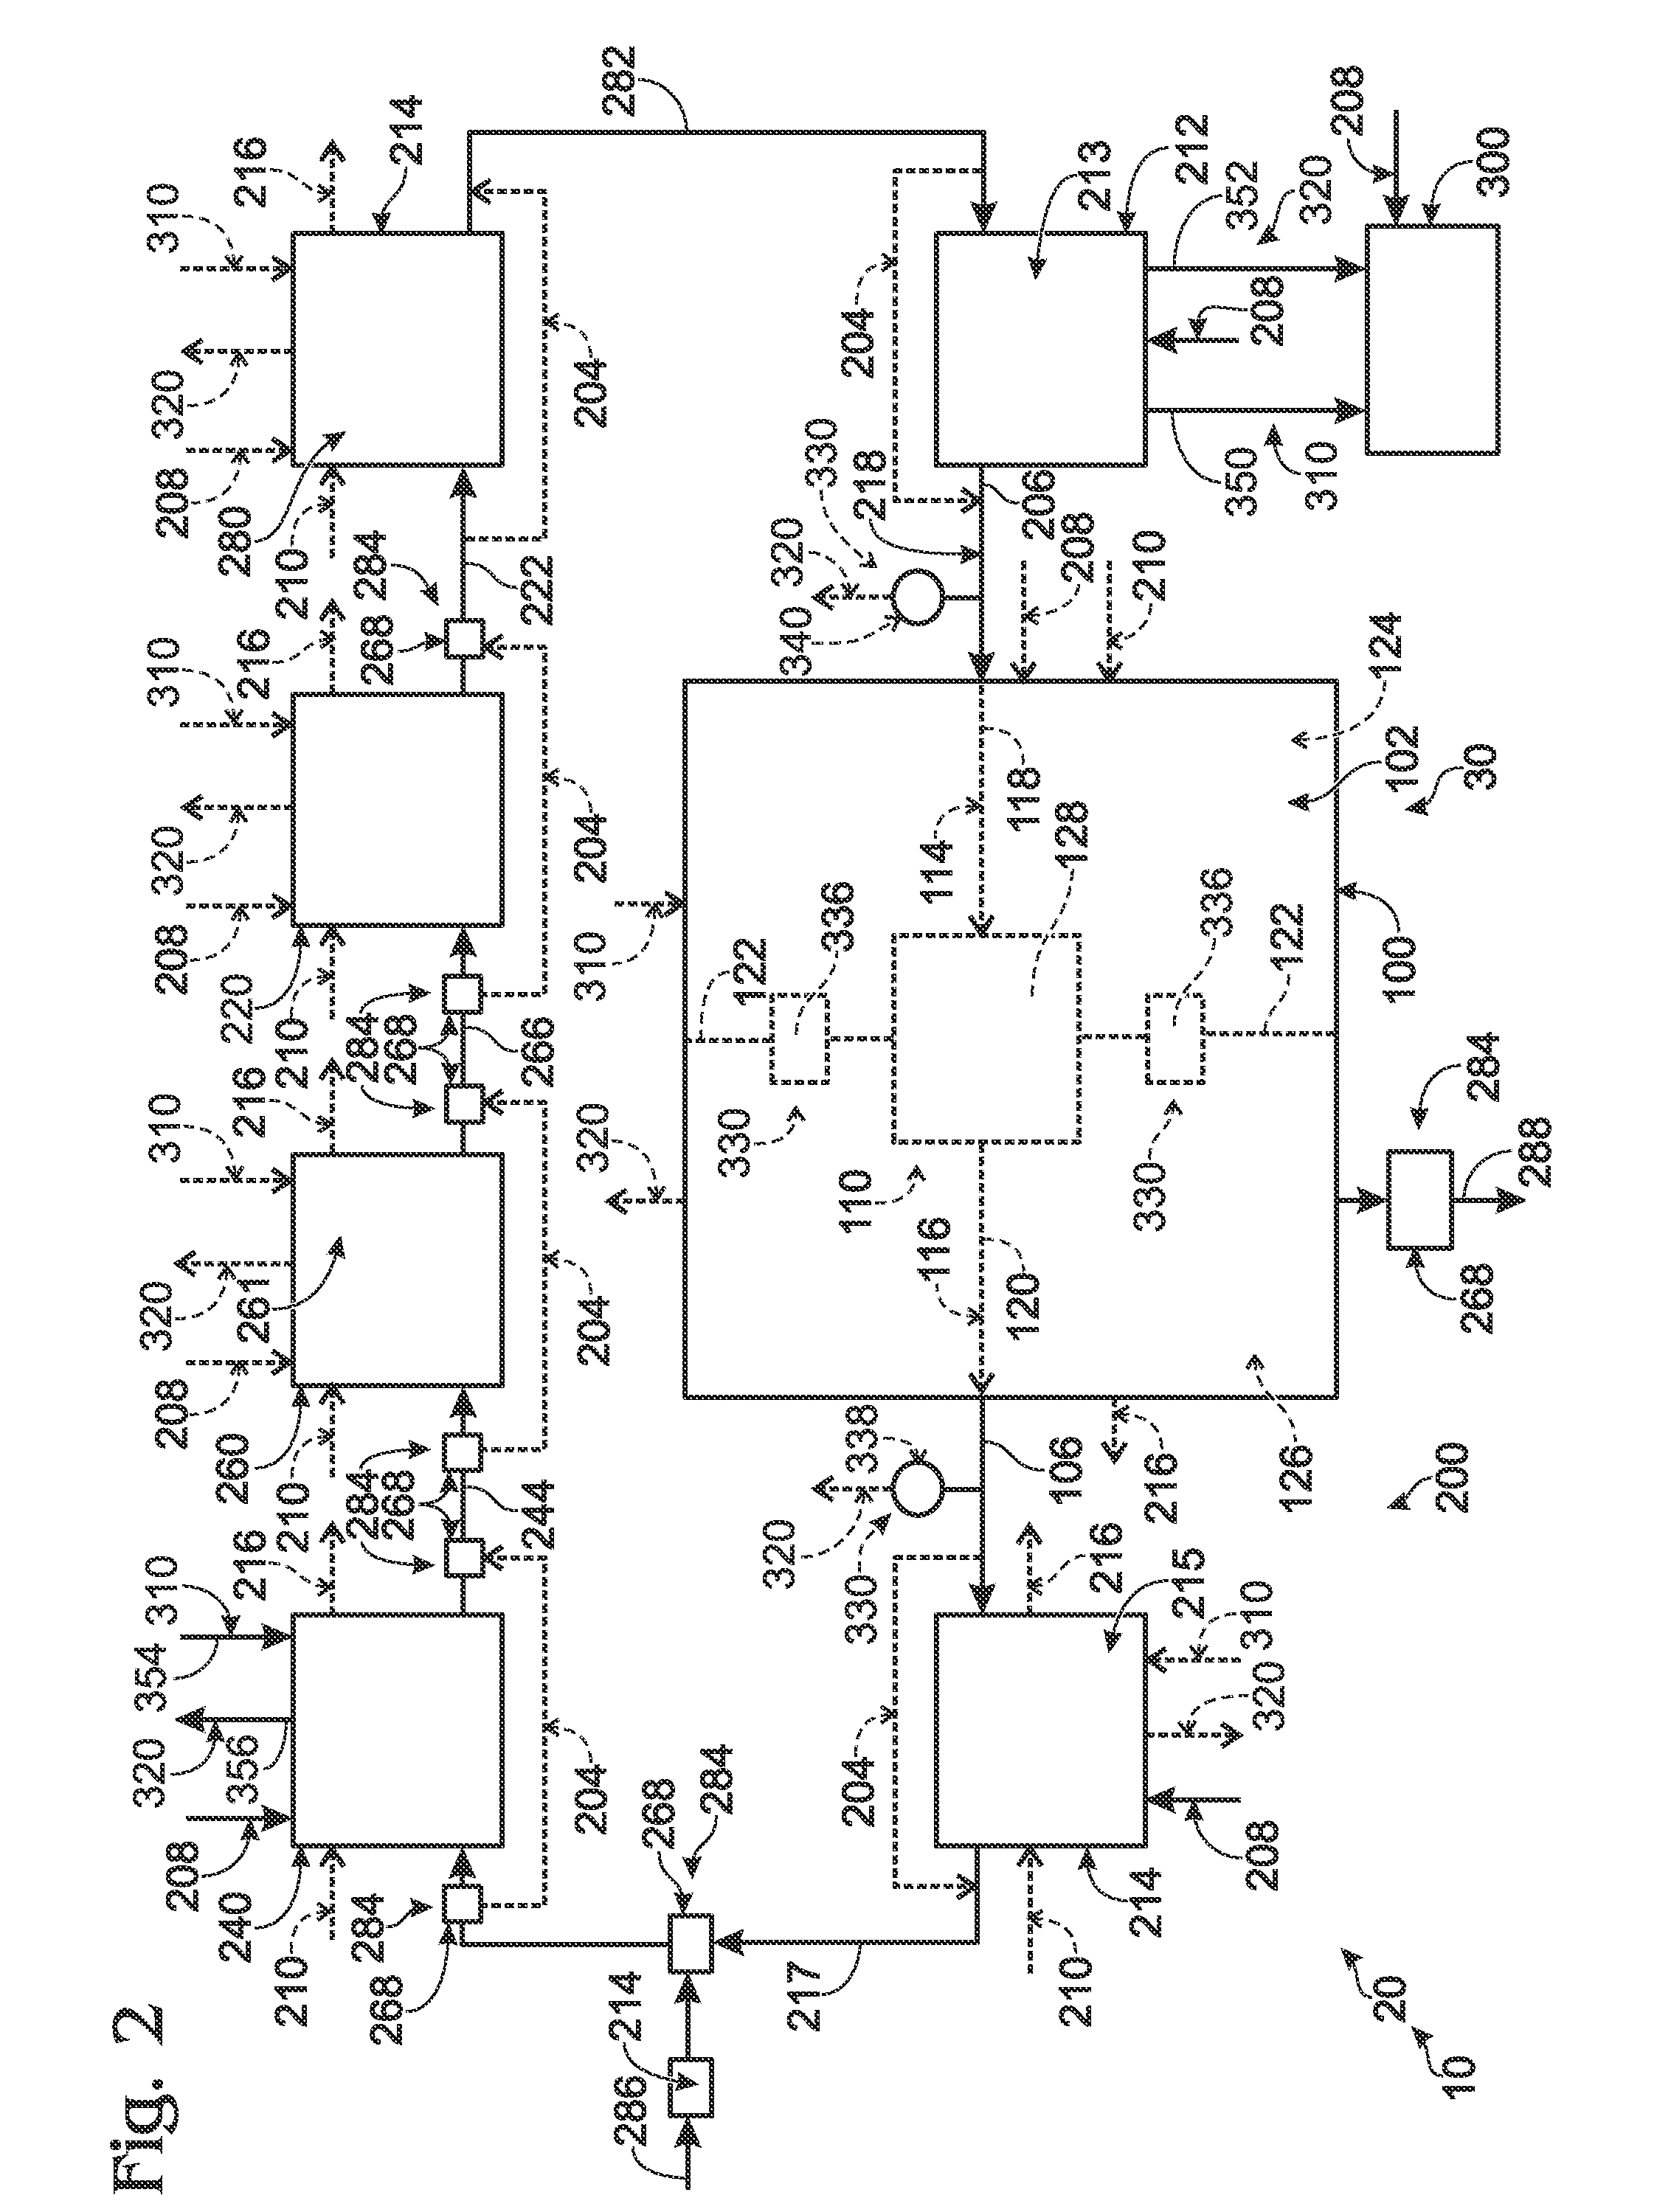 Systems and methods for cooling data centers and other electronic equipment